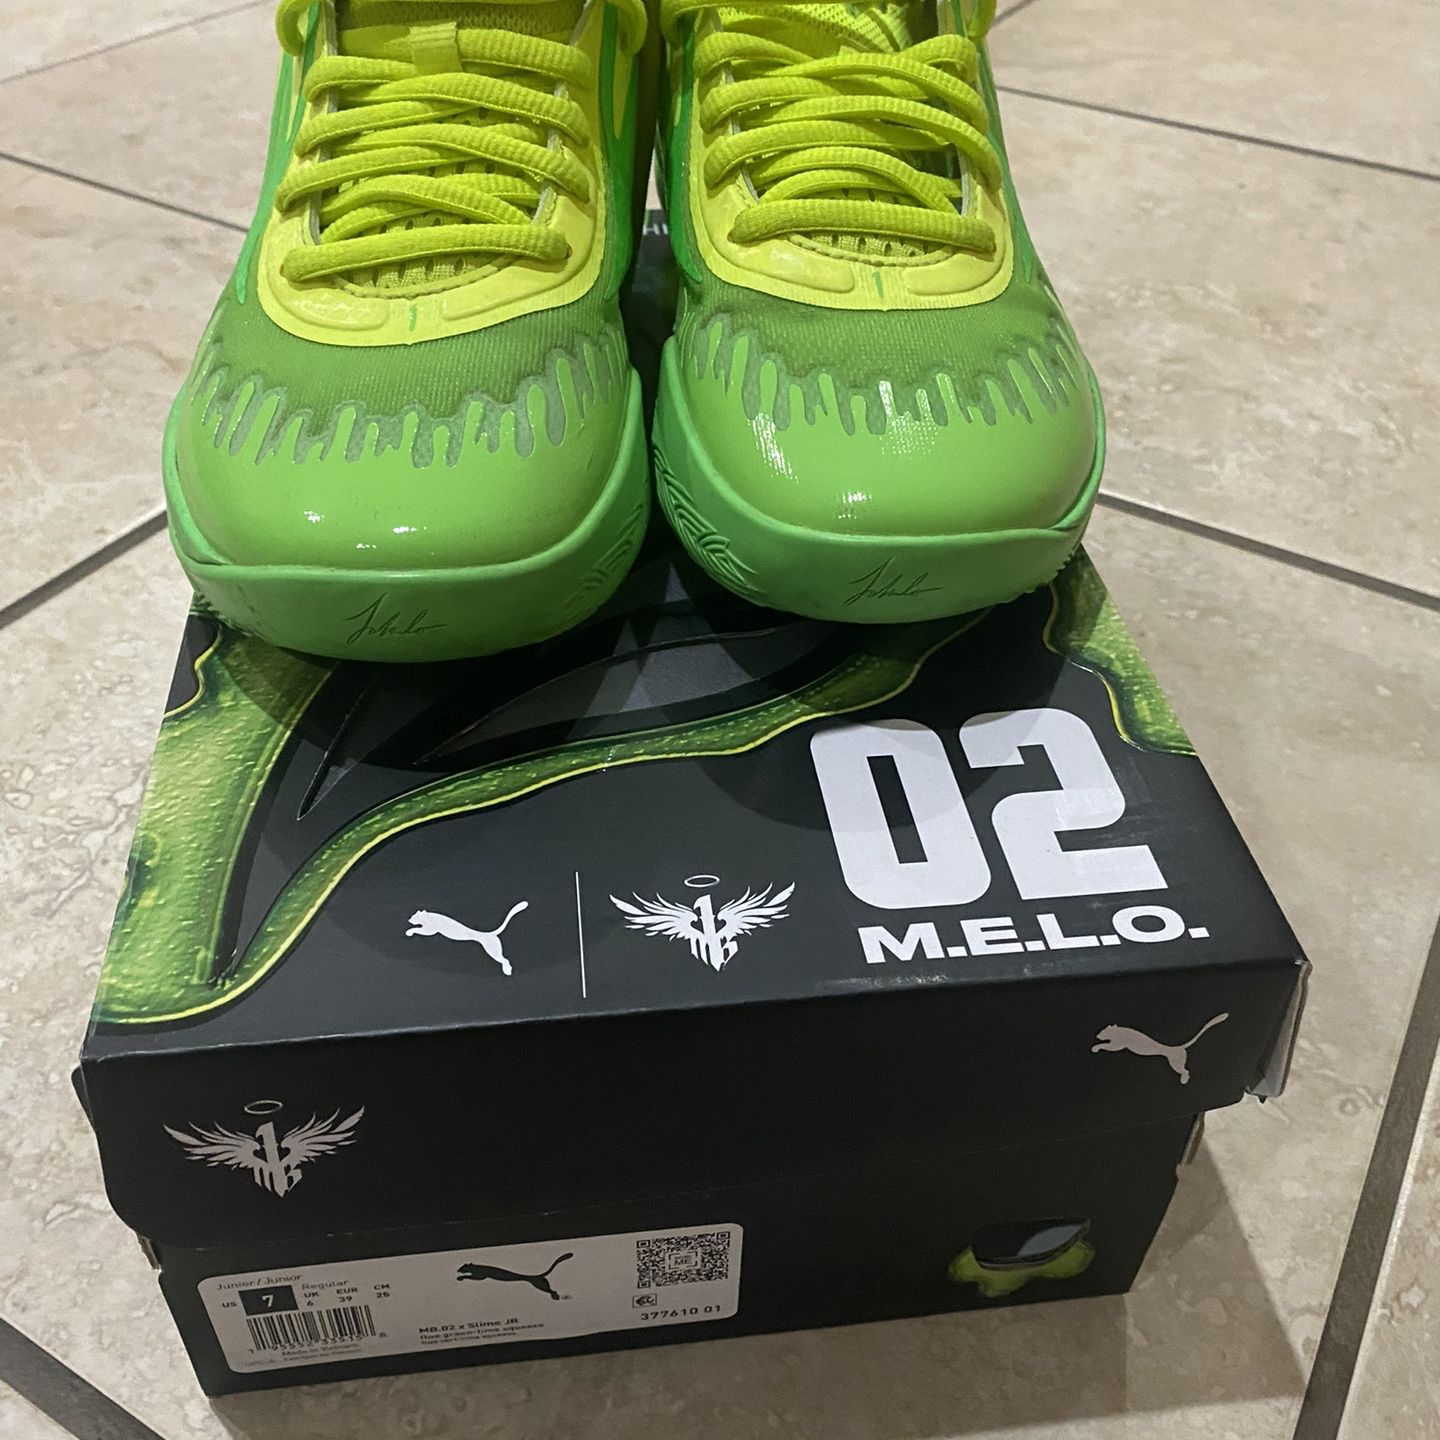 Mb02 Lamelo Ball Nickelodeon Slime Shoes